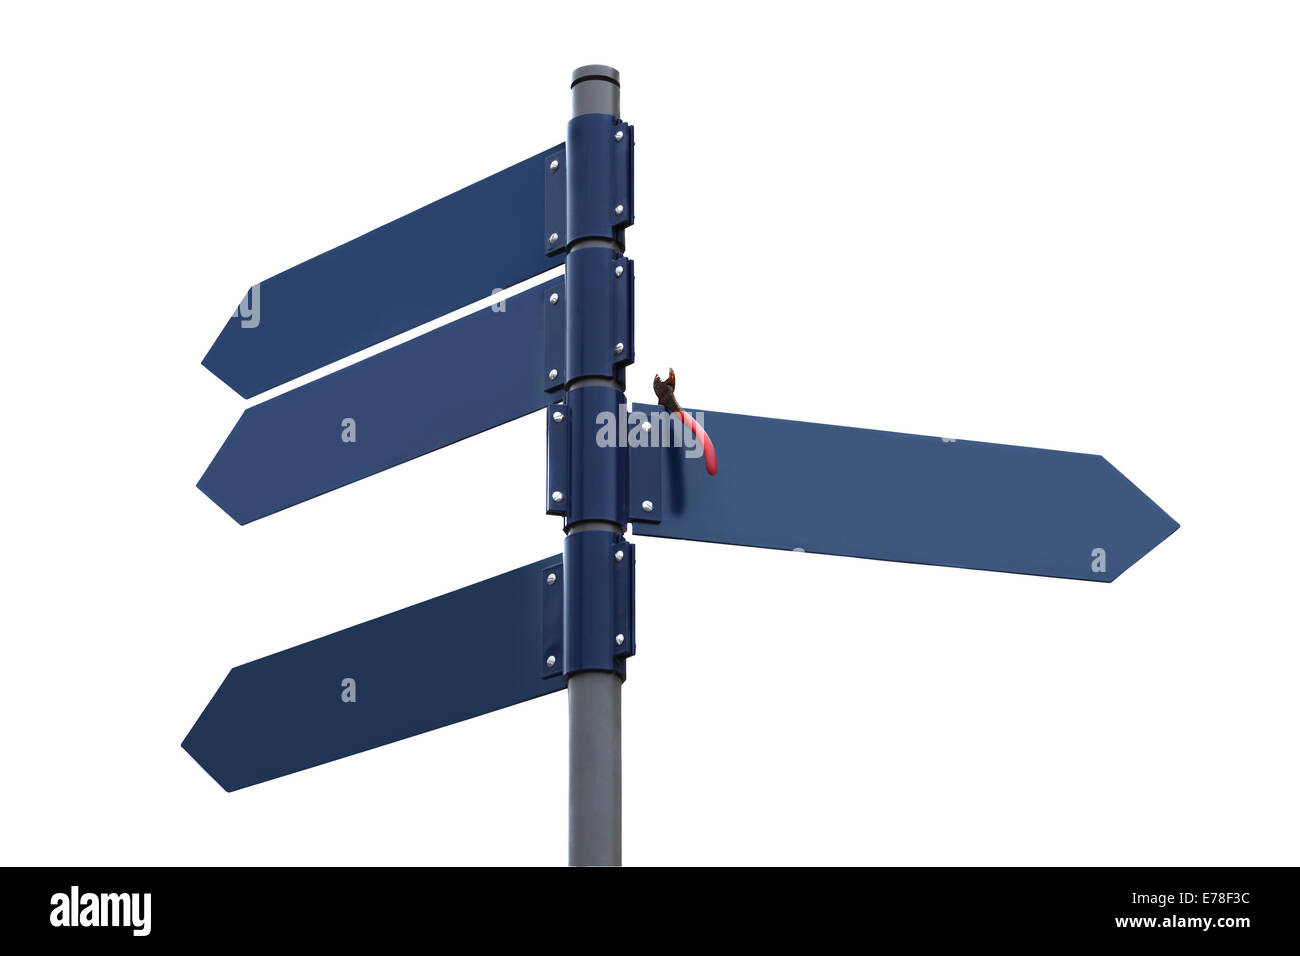 Waymark with four dark blue plates and foreign object on one of them Stock Photo